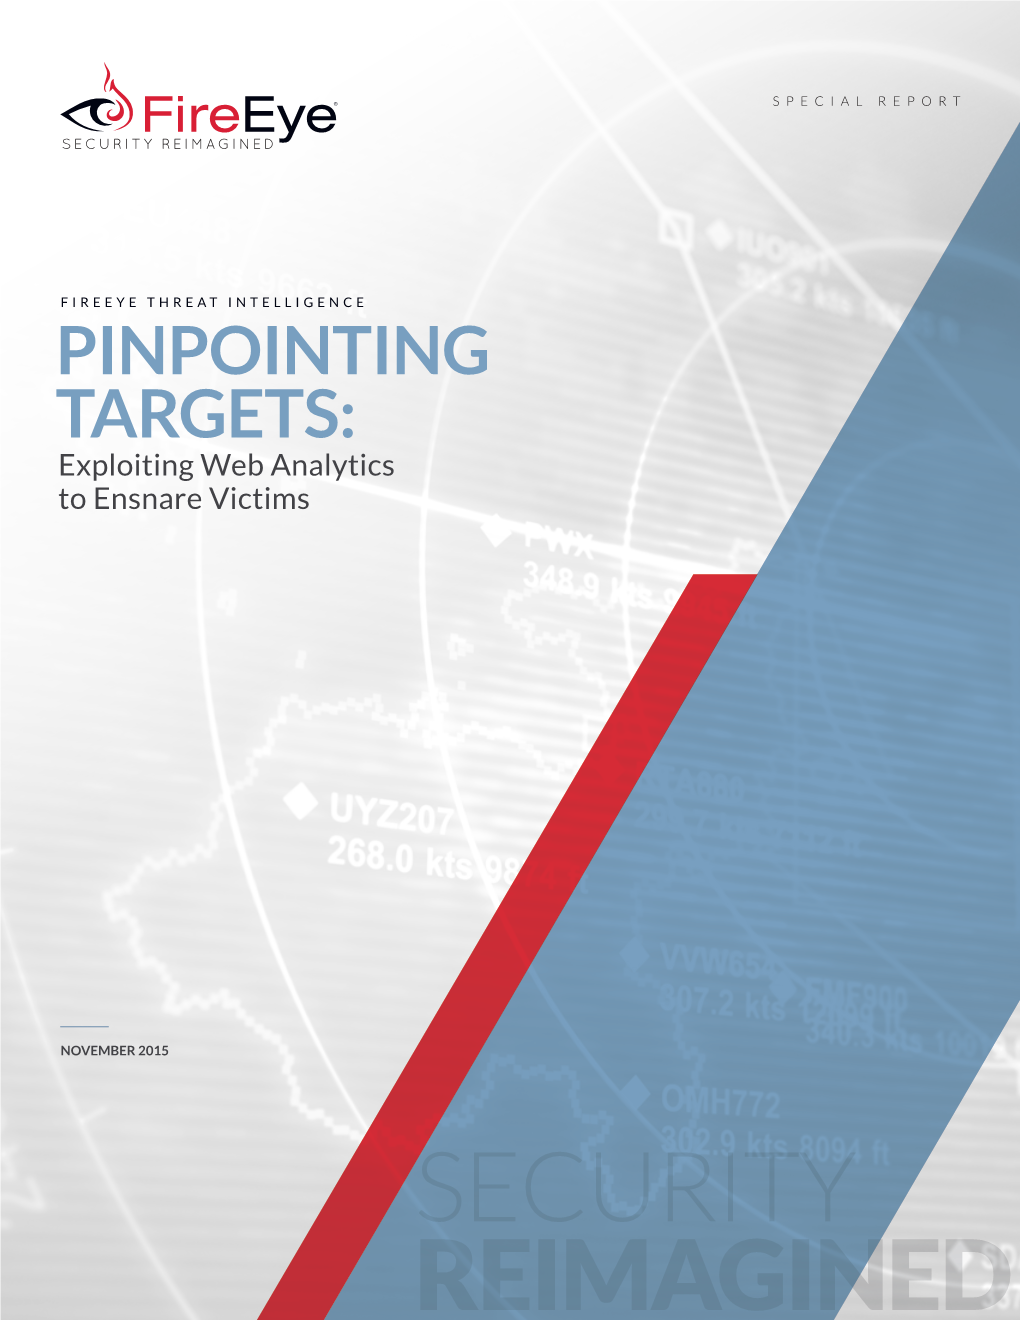 PINPOINTING TARGETS: Exploiting Web Analytics to Ensnare Victims